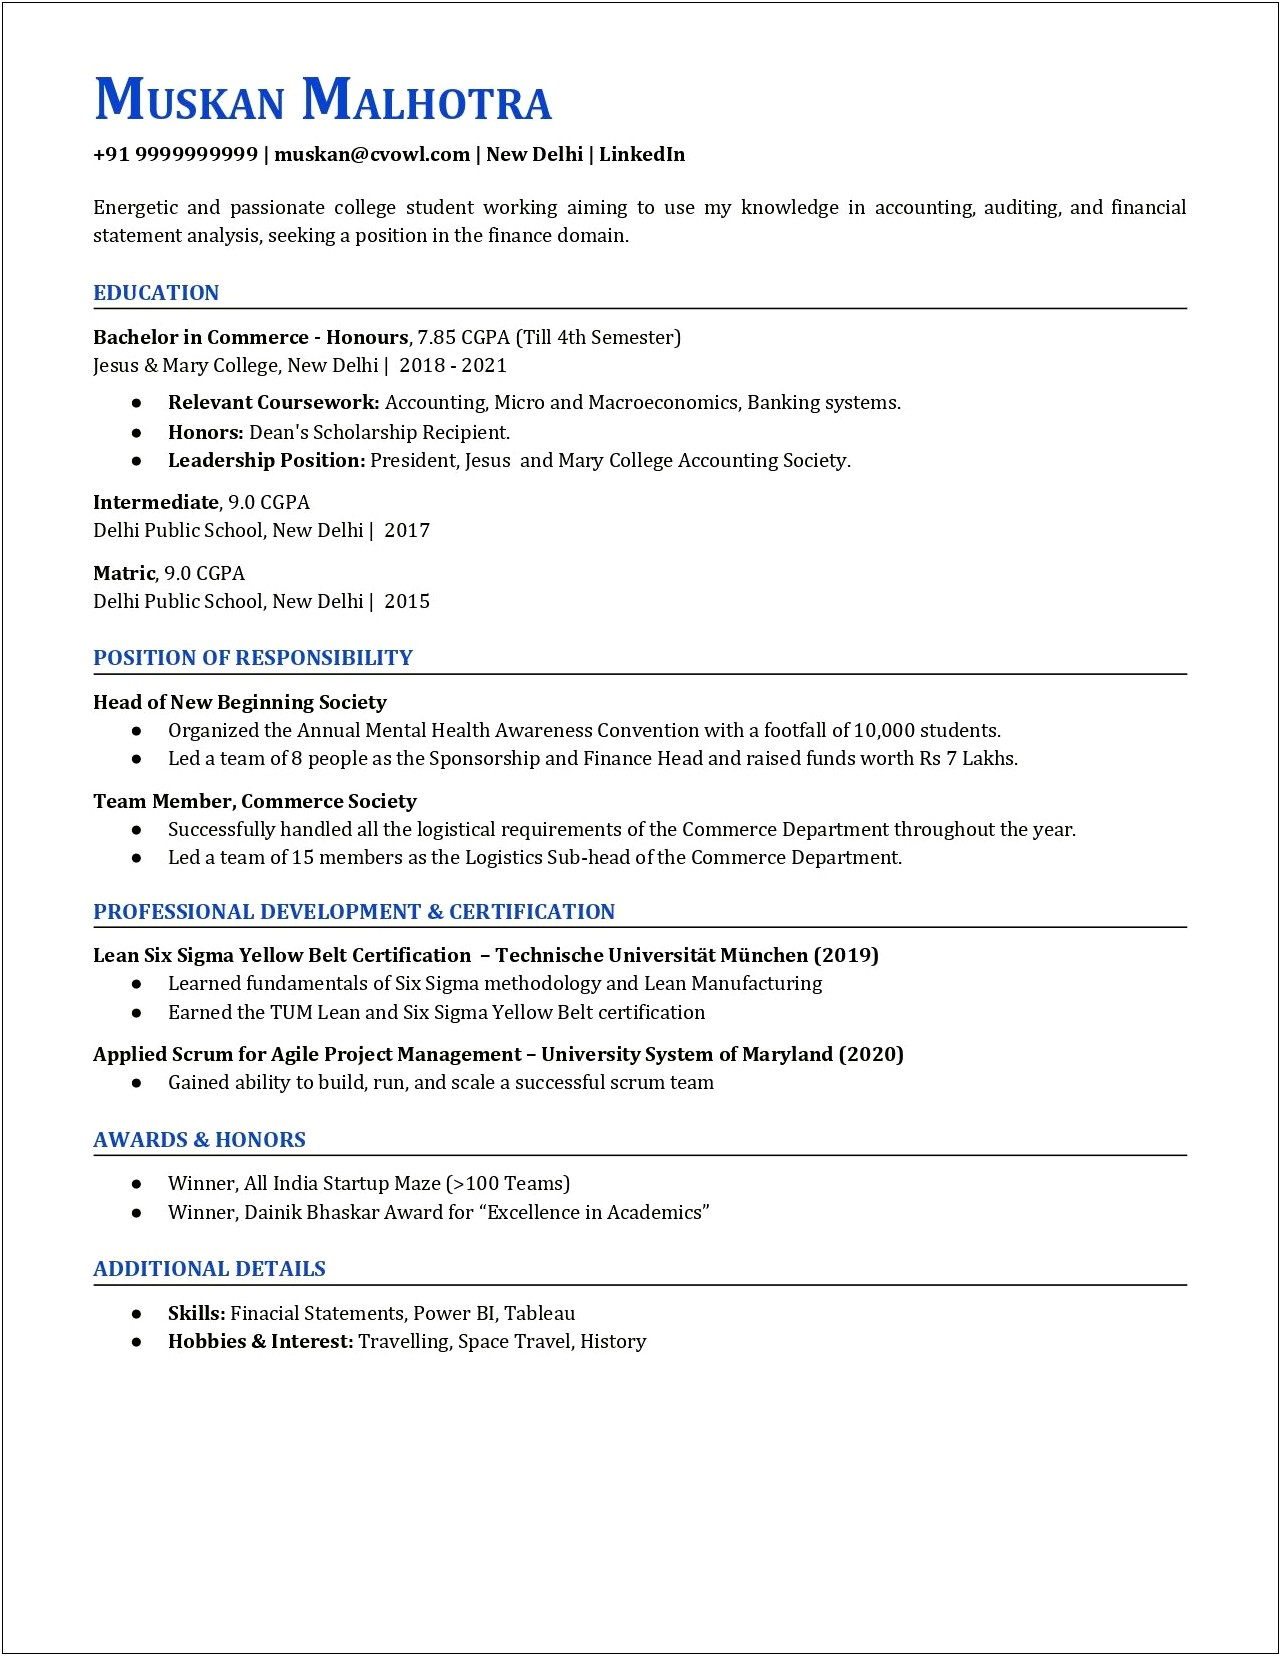 Profile Resume Examples For Accounting Internships